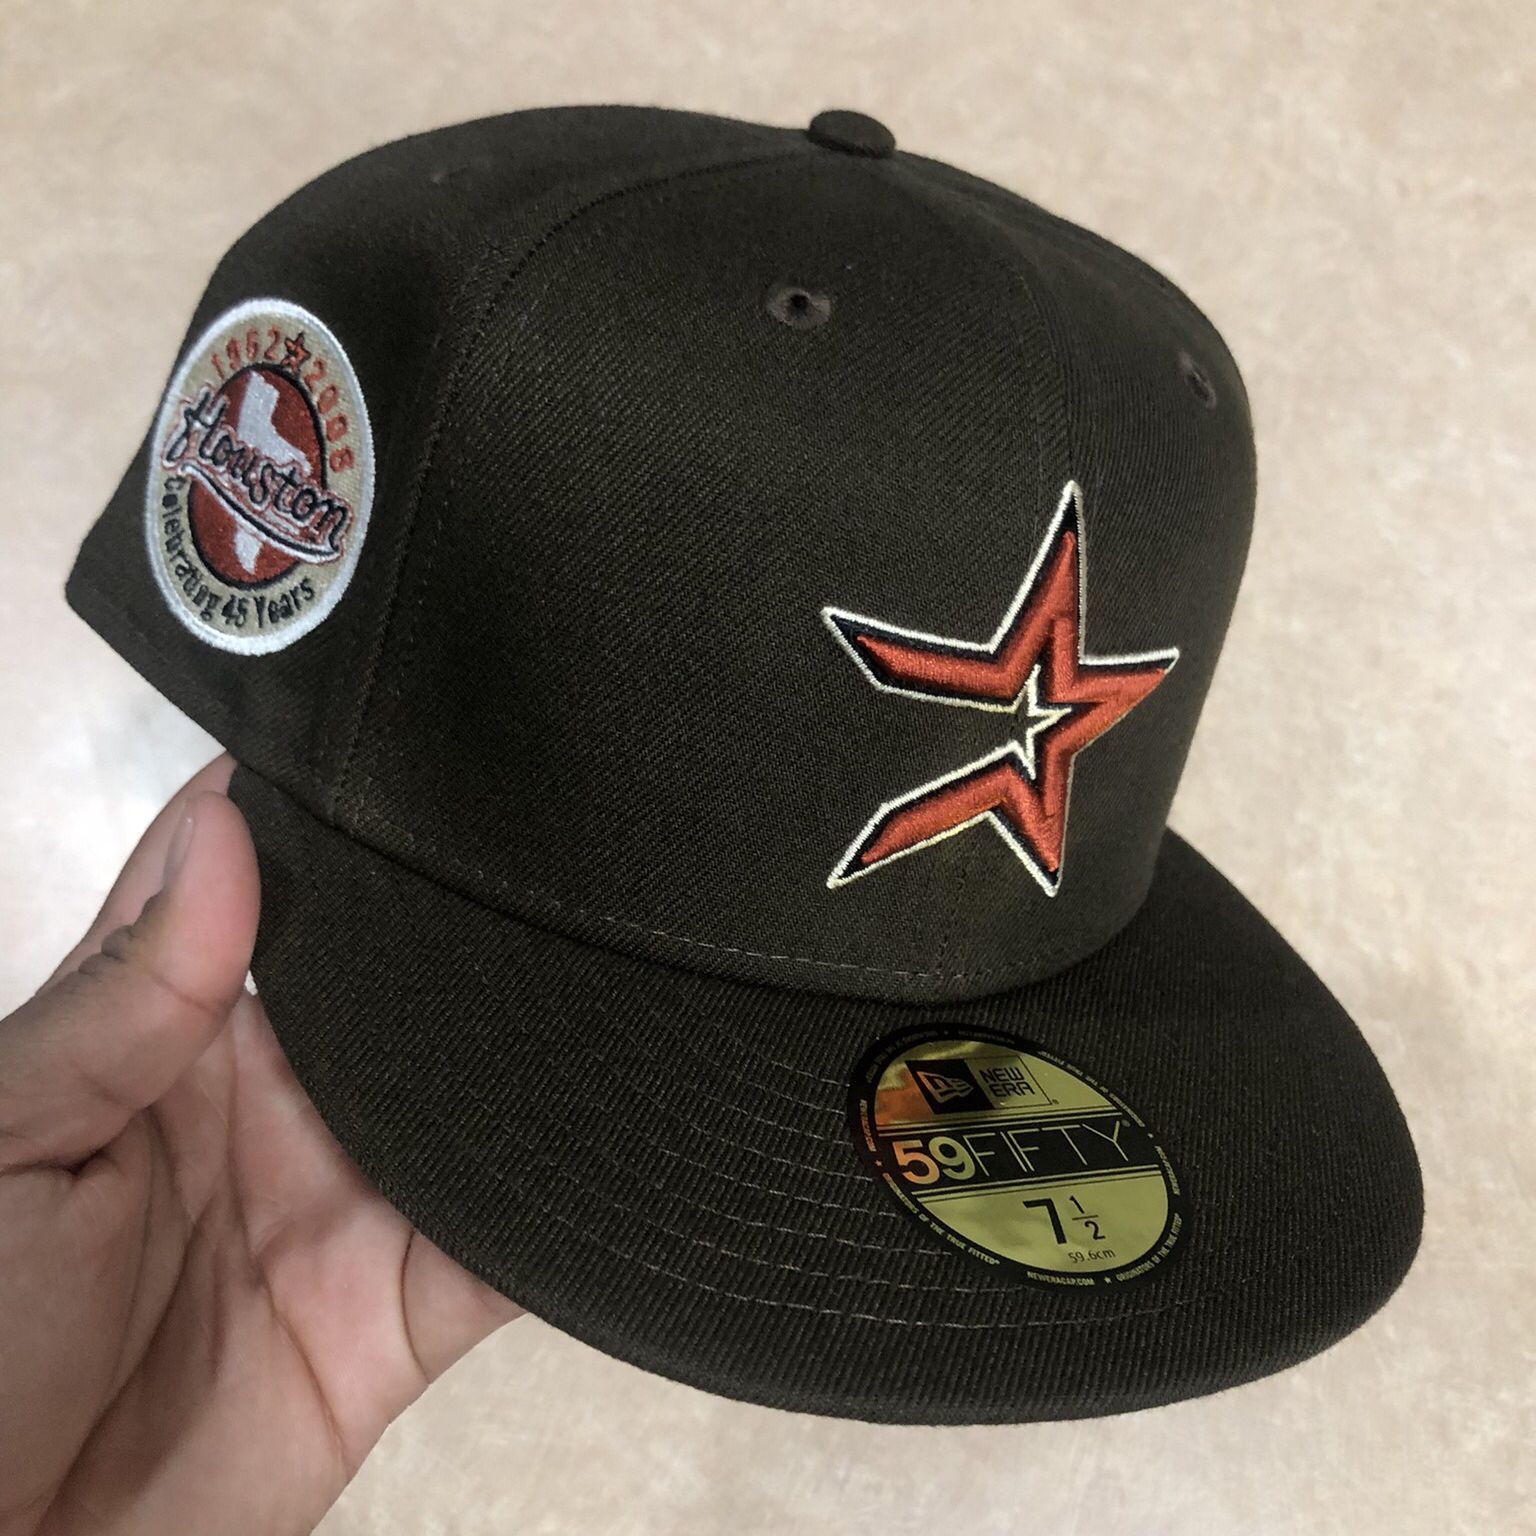 Houston Astros jersey and 2 hats for Sale in Bridgeport, CT - OfferUp